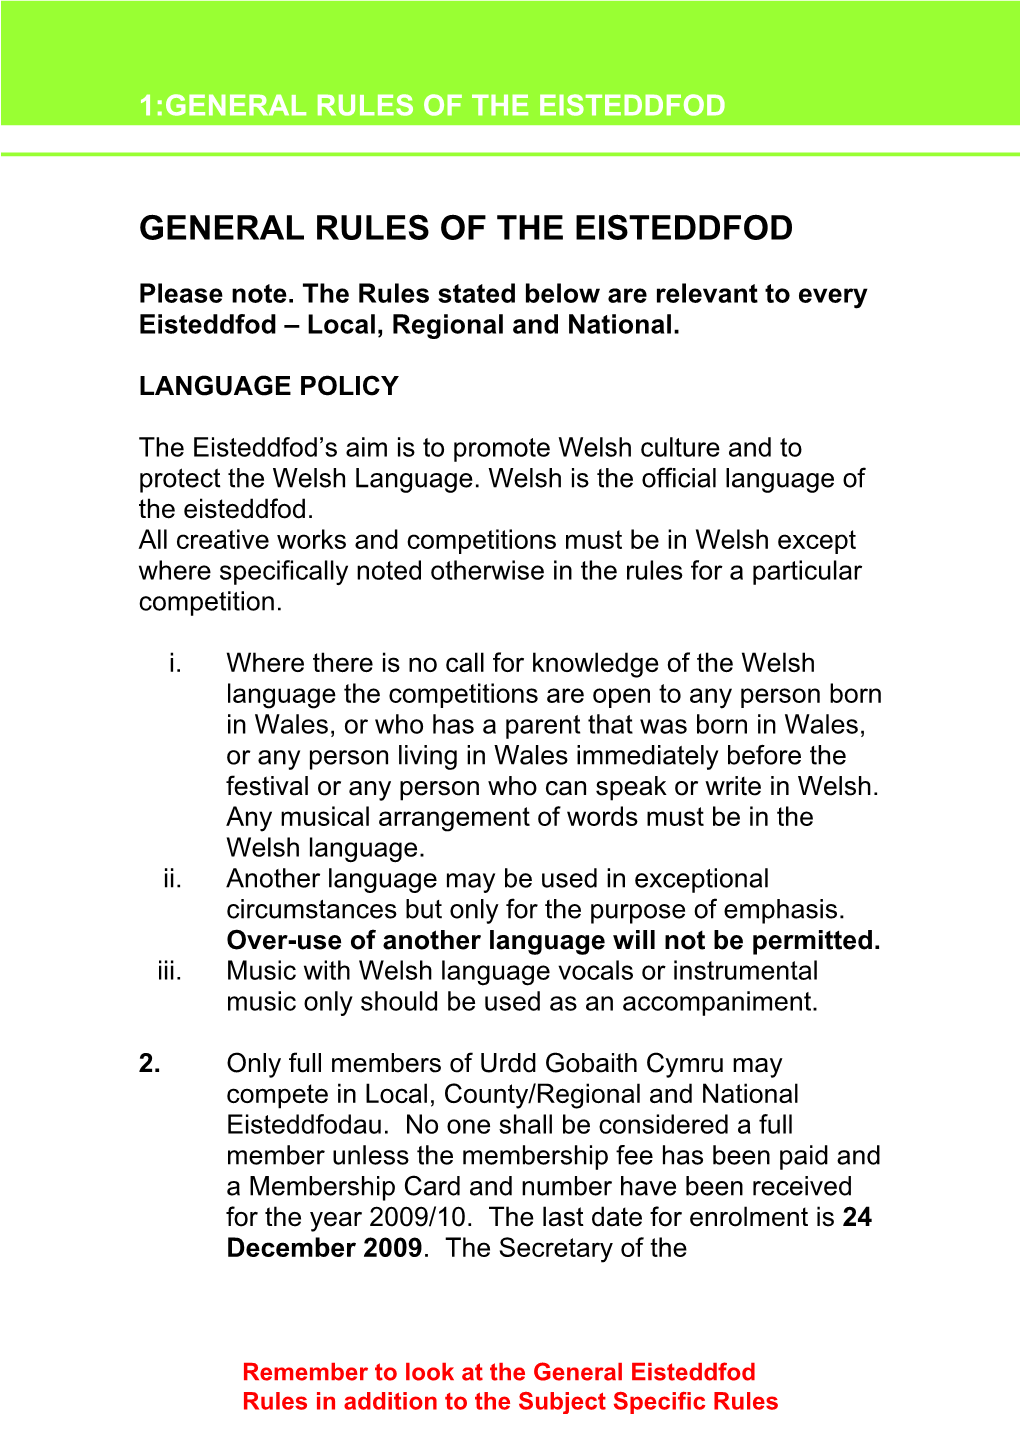 General Rules of the Eisteddfod